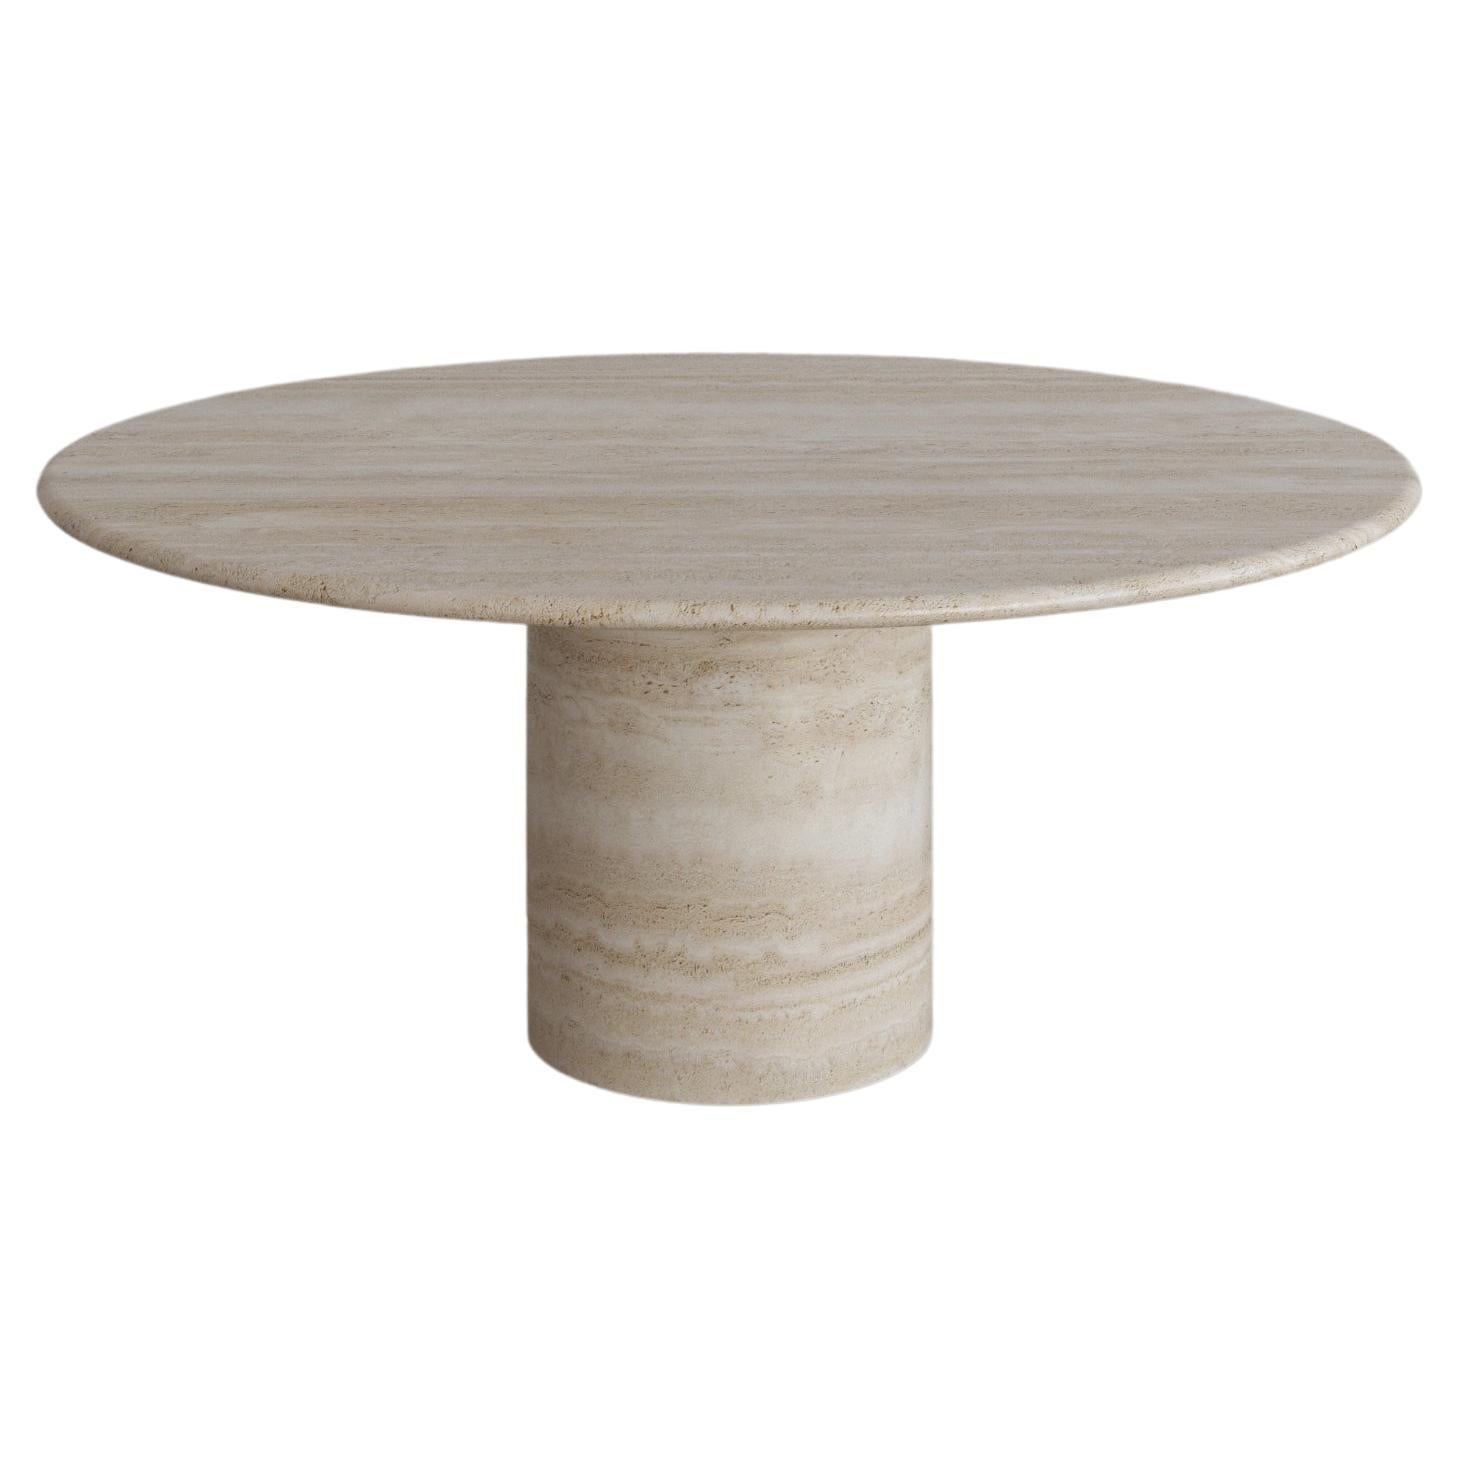 Nude Travertine Voyage Coffee Table II by the Essentialist For Sale